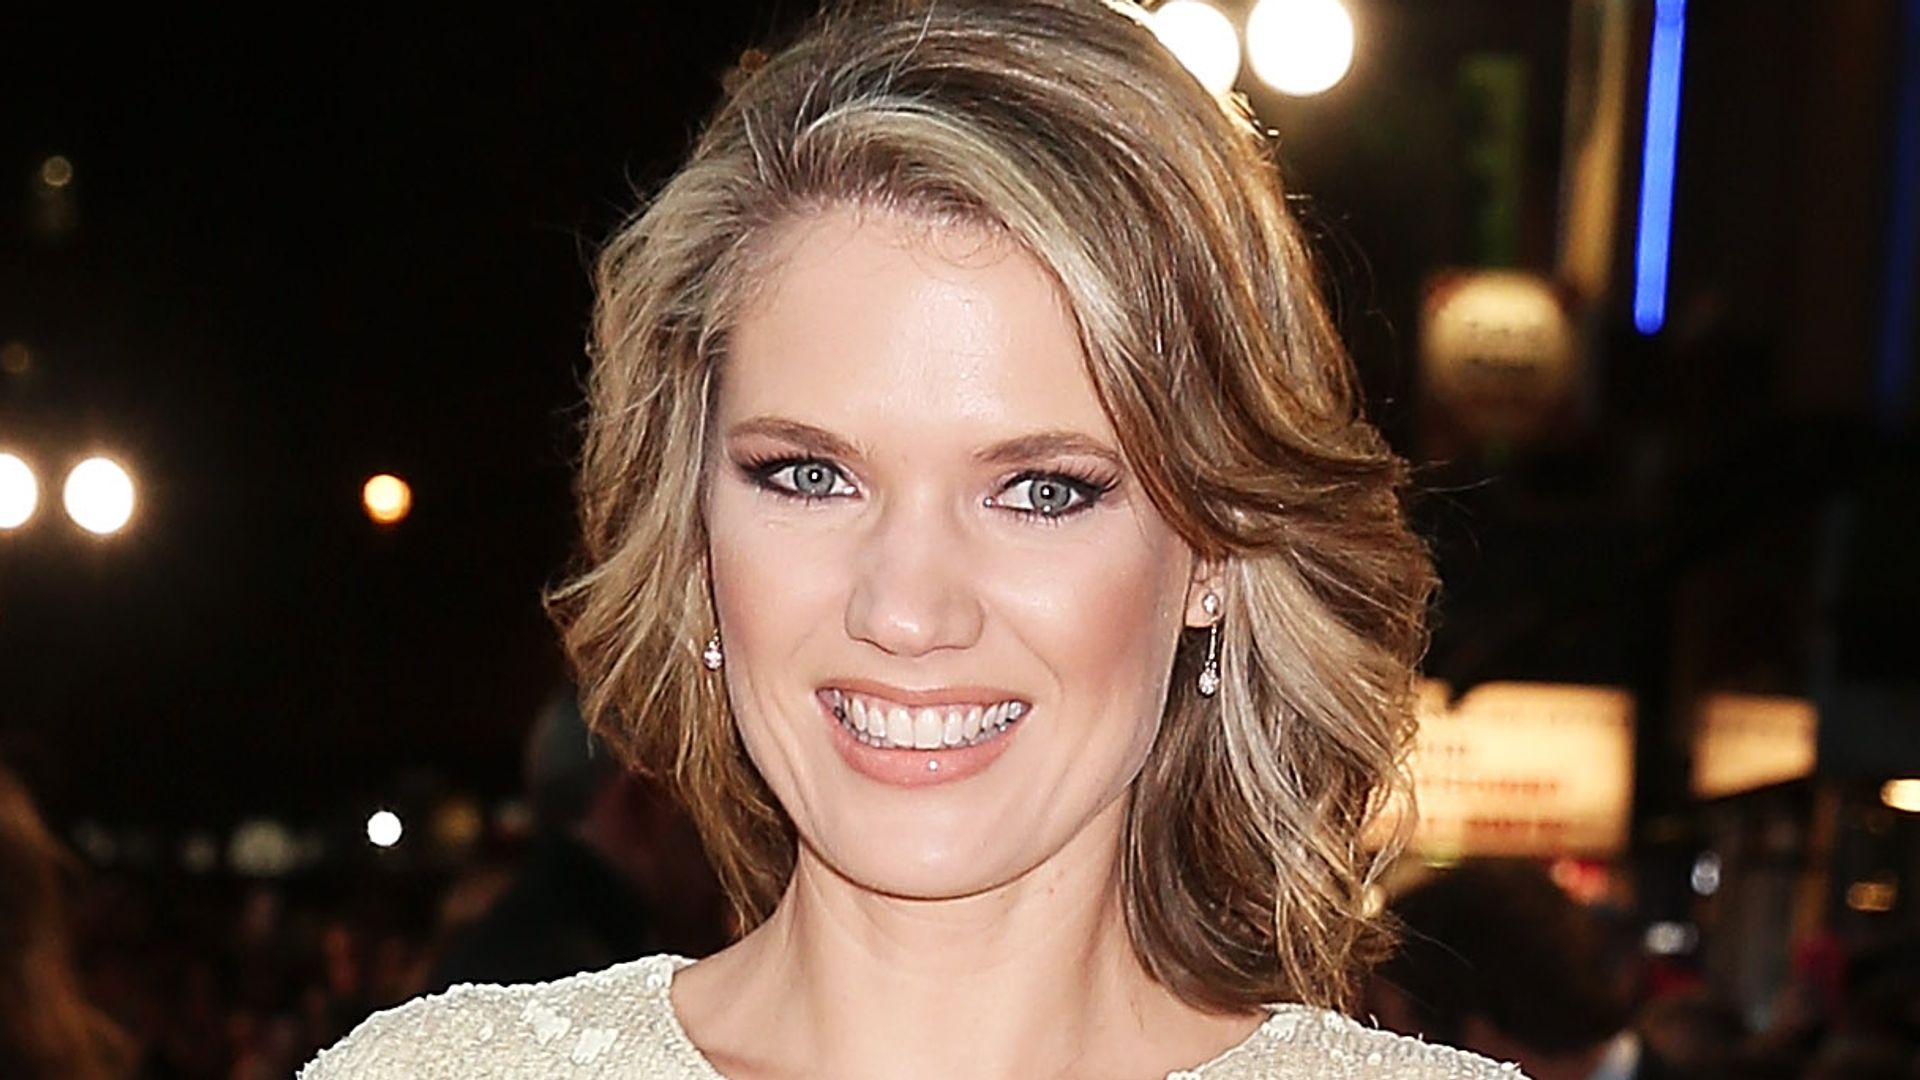 Charlotte Hawkins in a white and black dress with curled hair